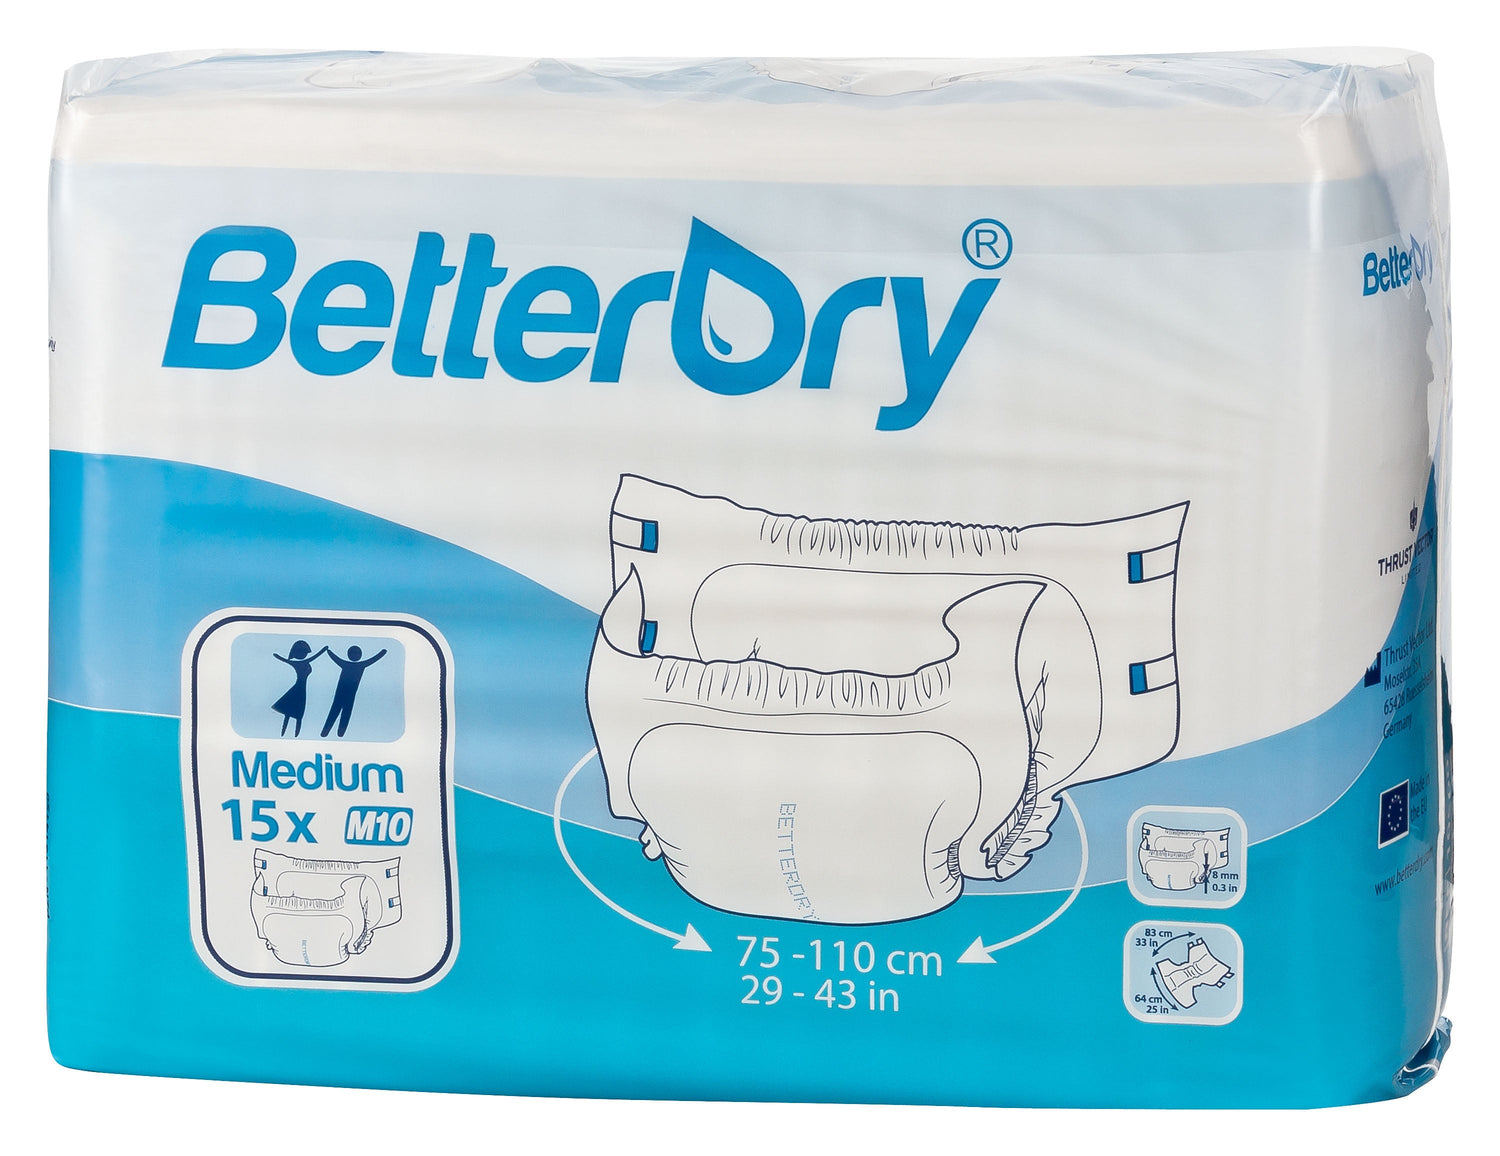 BetterDry 10 adult diaper medium polybag - for maximum protection for heavy incontinence.